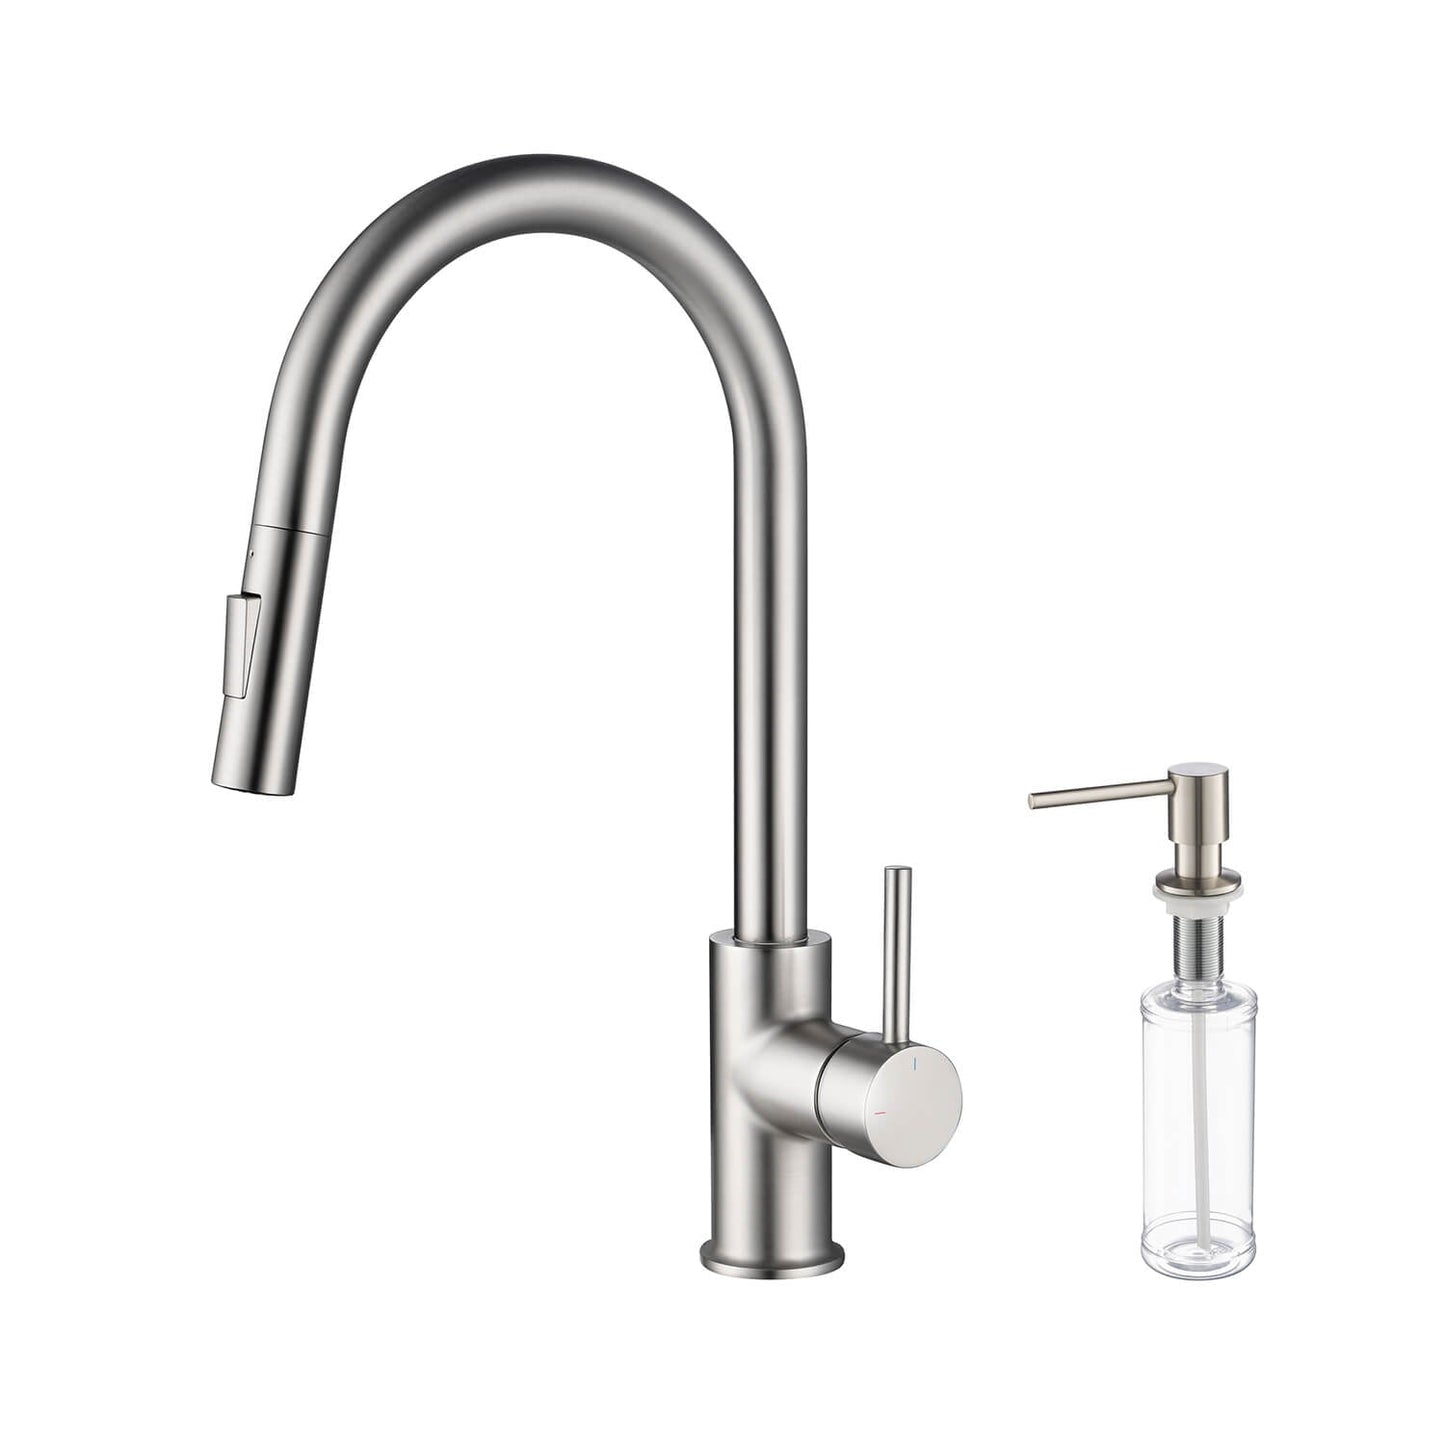 Kibi Circular Single Handle Pull Down Kitchen Faucet With Soap Dispenser in Brushed Nickel Finish